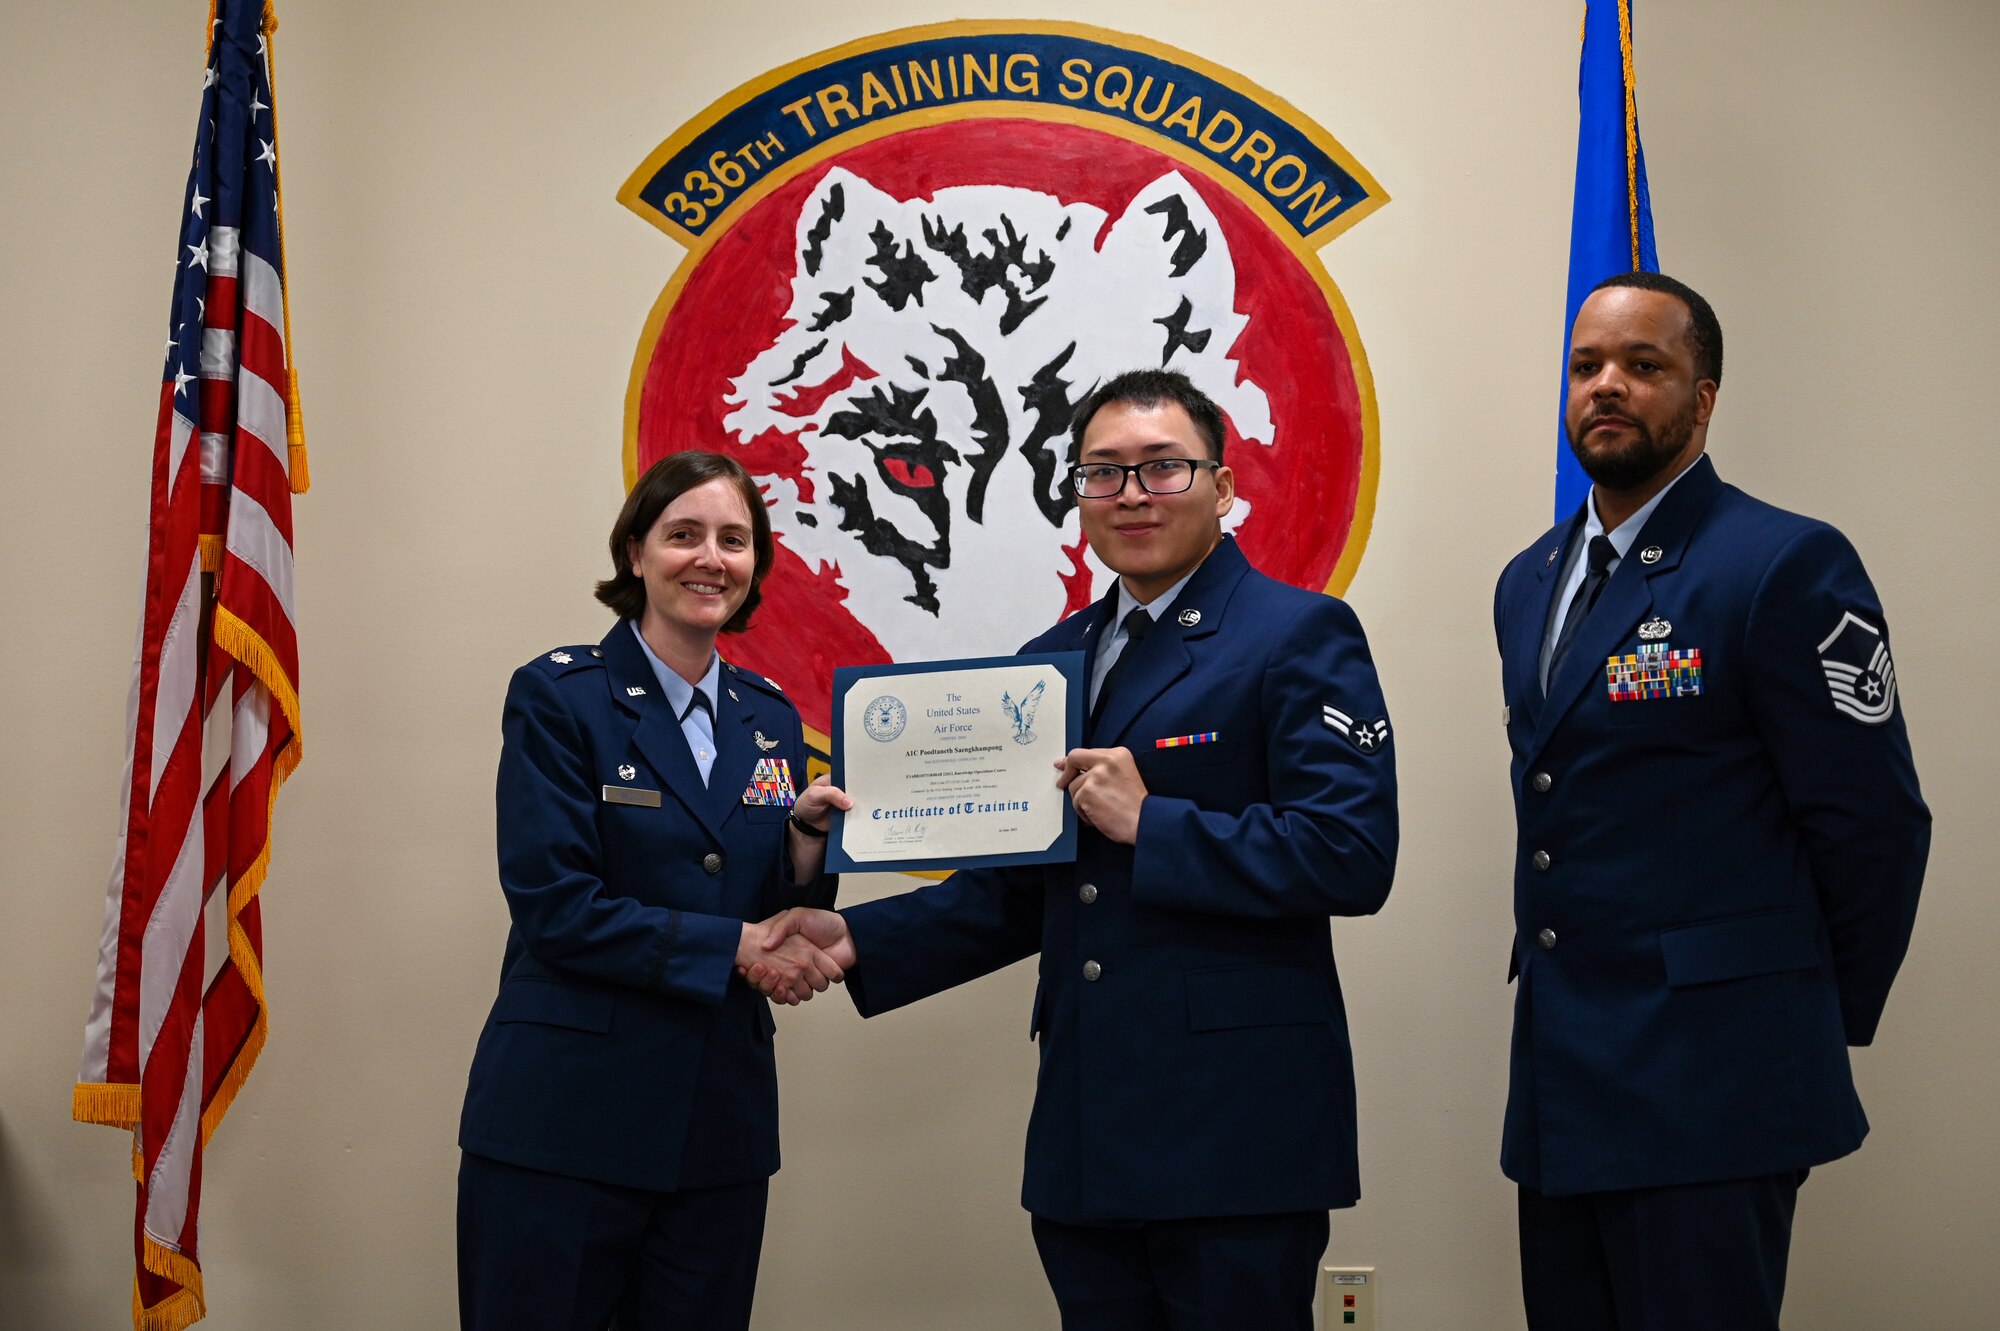 U.S Air Force Lt. Col. Jennifer Weller, 336th Training Squadron commander, Airman 1st Class Poodthaneth Saengkhamphong, 336th TRS knowledge operations course graduate, and Master Sgt. Jacee Lawary, 336th TRS systems operations section chief, pose for photo on Keesler Air Force Base, Mississippi, June 16th, 2023.